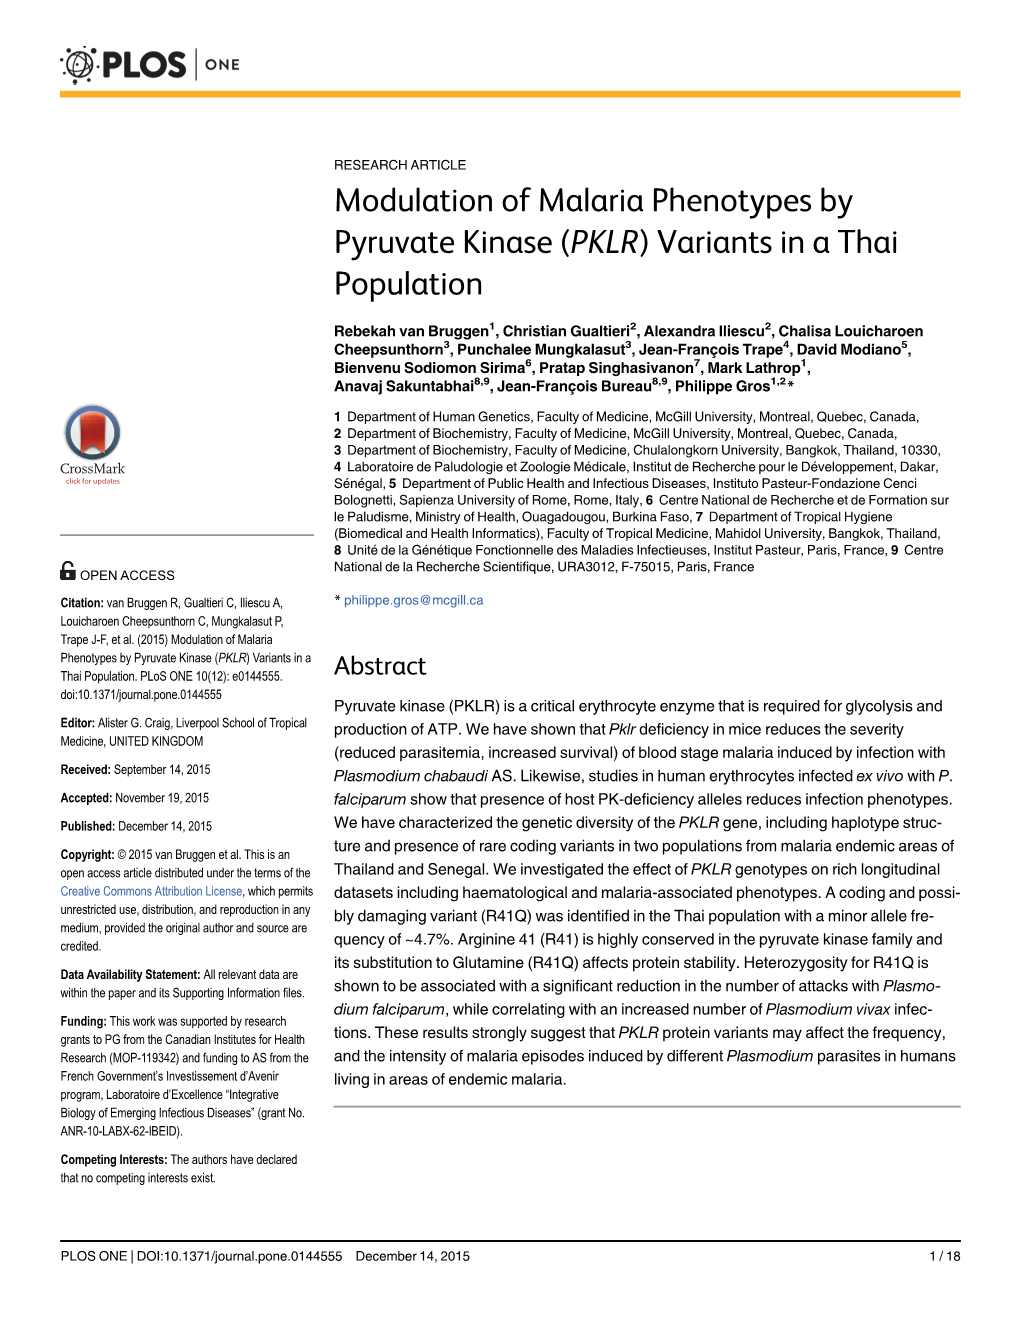 Modulation of Malaria Phenotypes by Pyruvate Kinase (PKLR) Variants in a Thai Population